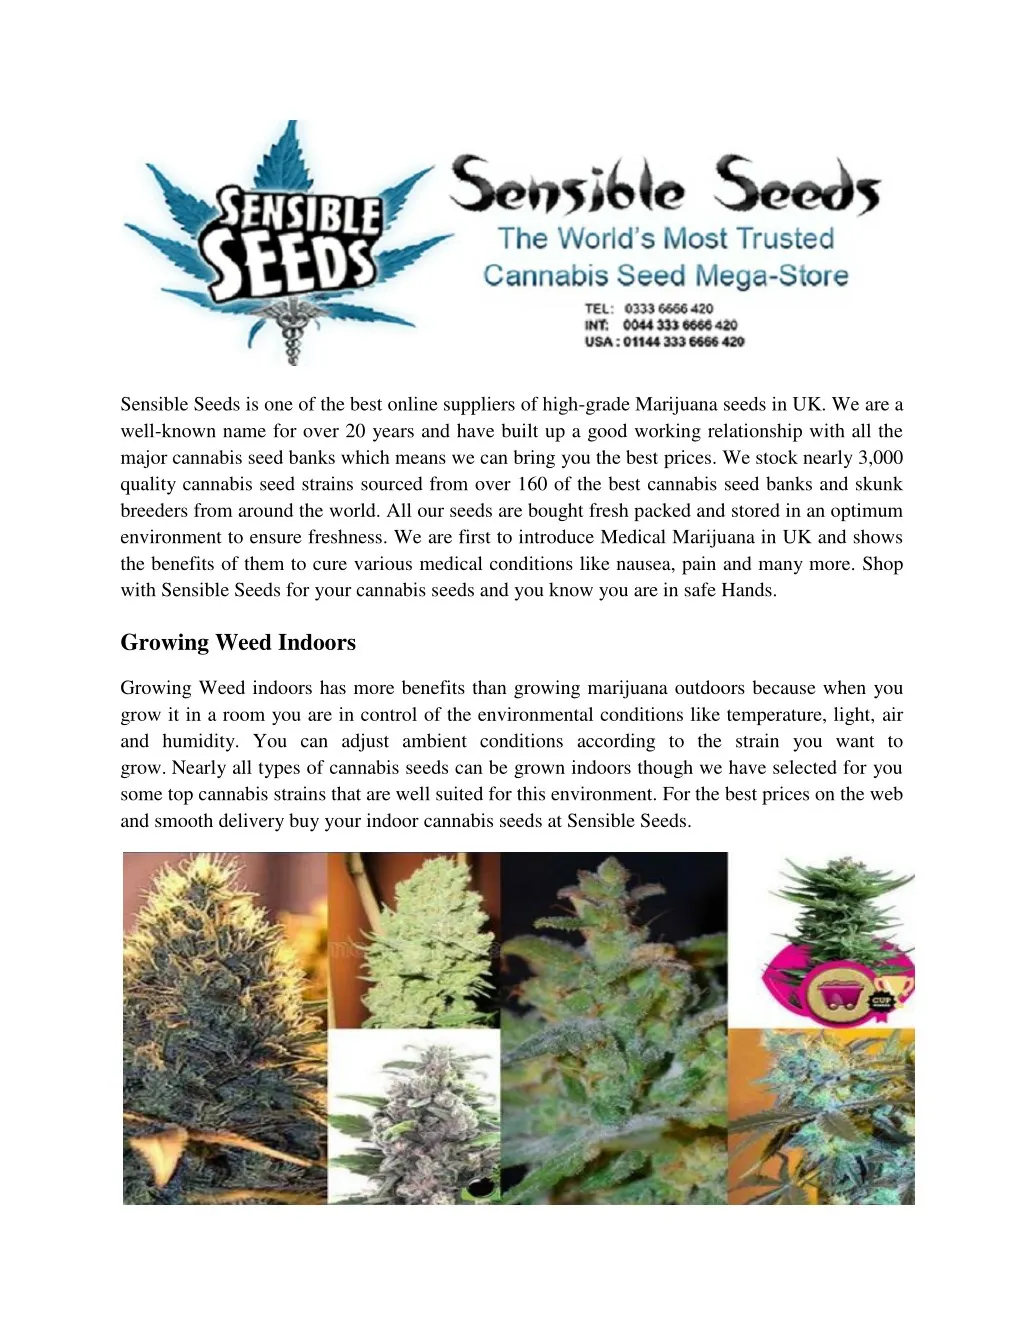 sensible seeds is one of the best online